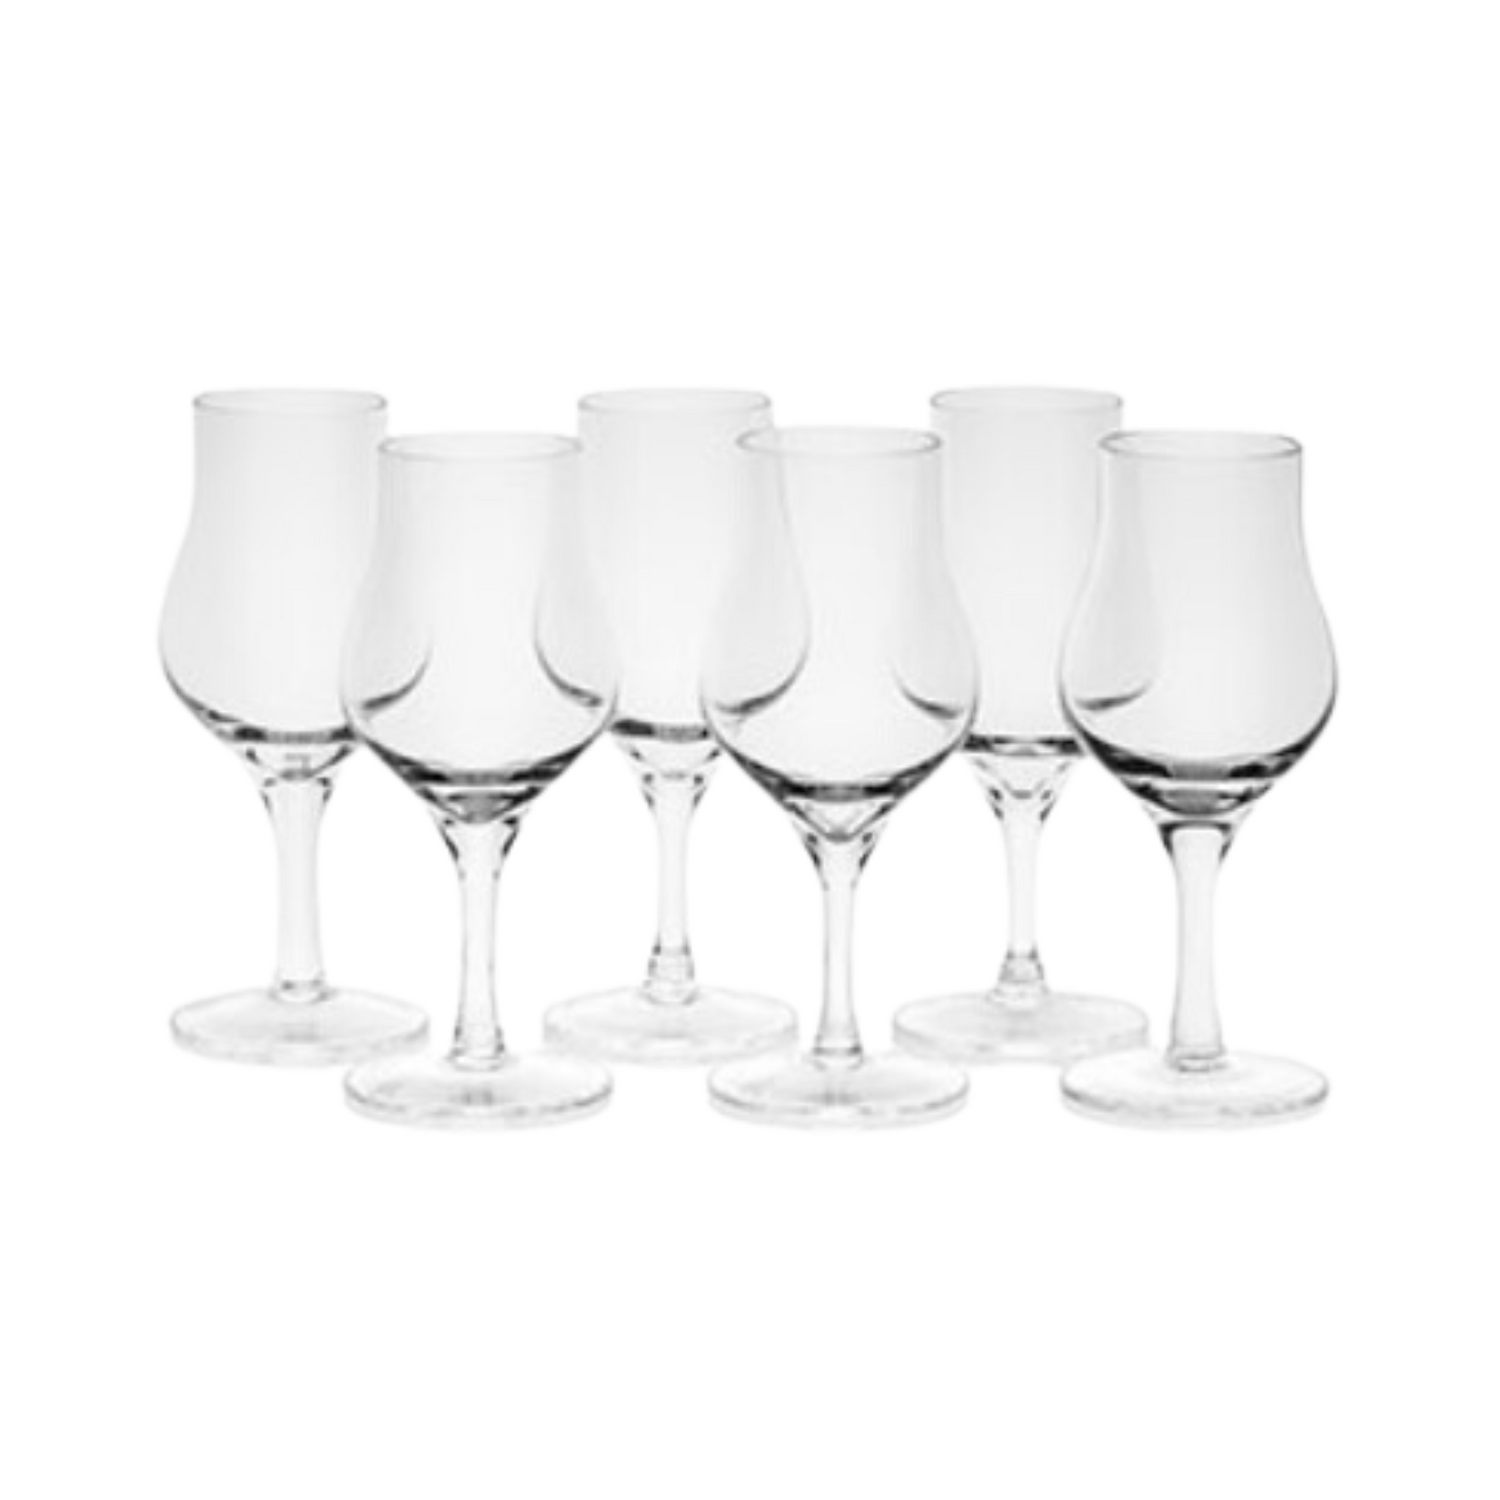 Amber Handmade Whisky Nosing & Tasting Glasses G200 - Pack of 6 (Without Lid or Gift Box)